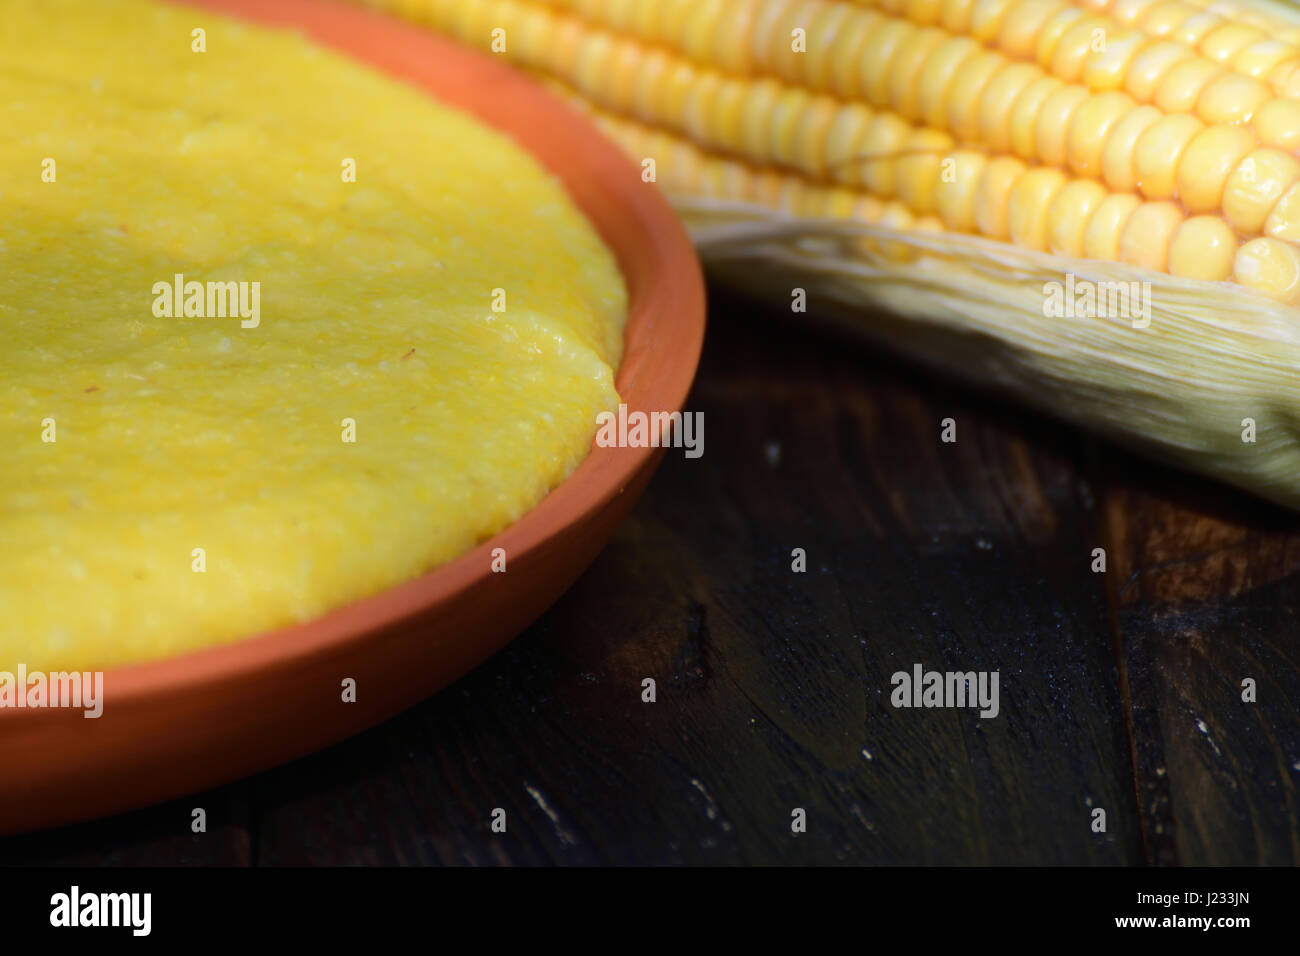 Close shoot of corn porridge on clay plate next to a corn cob. Wooden table, outdoors. Stock Photo